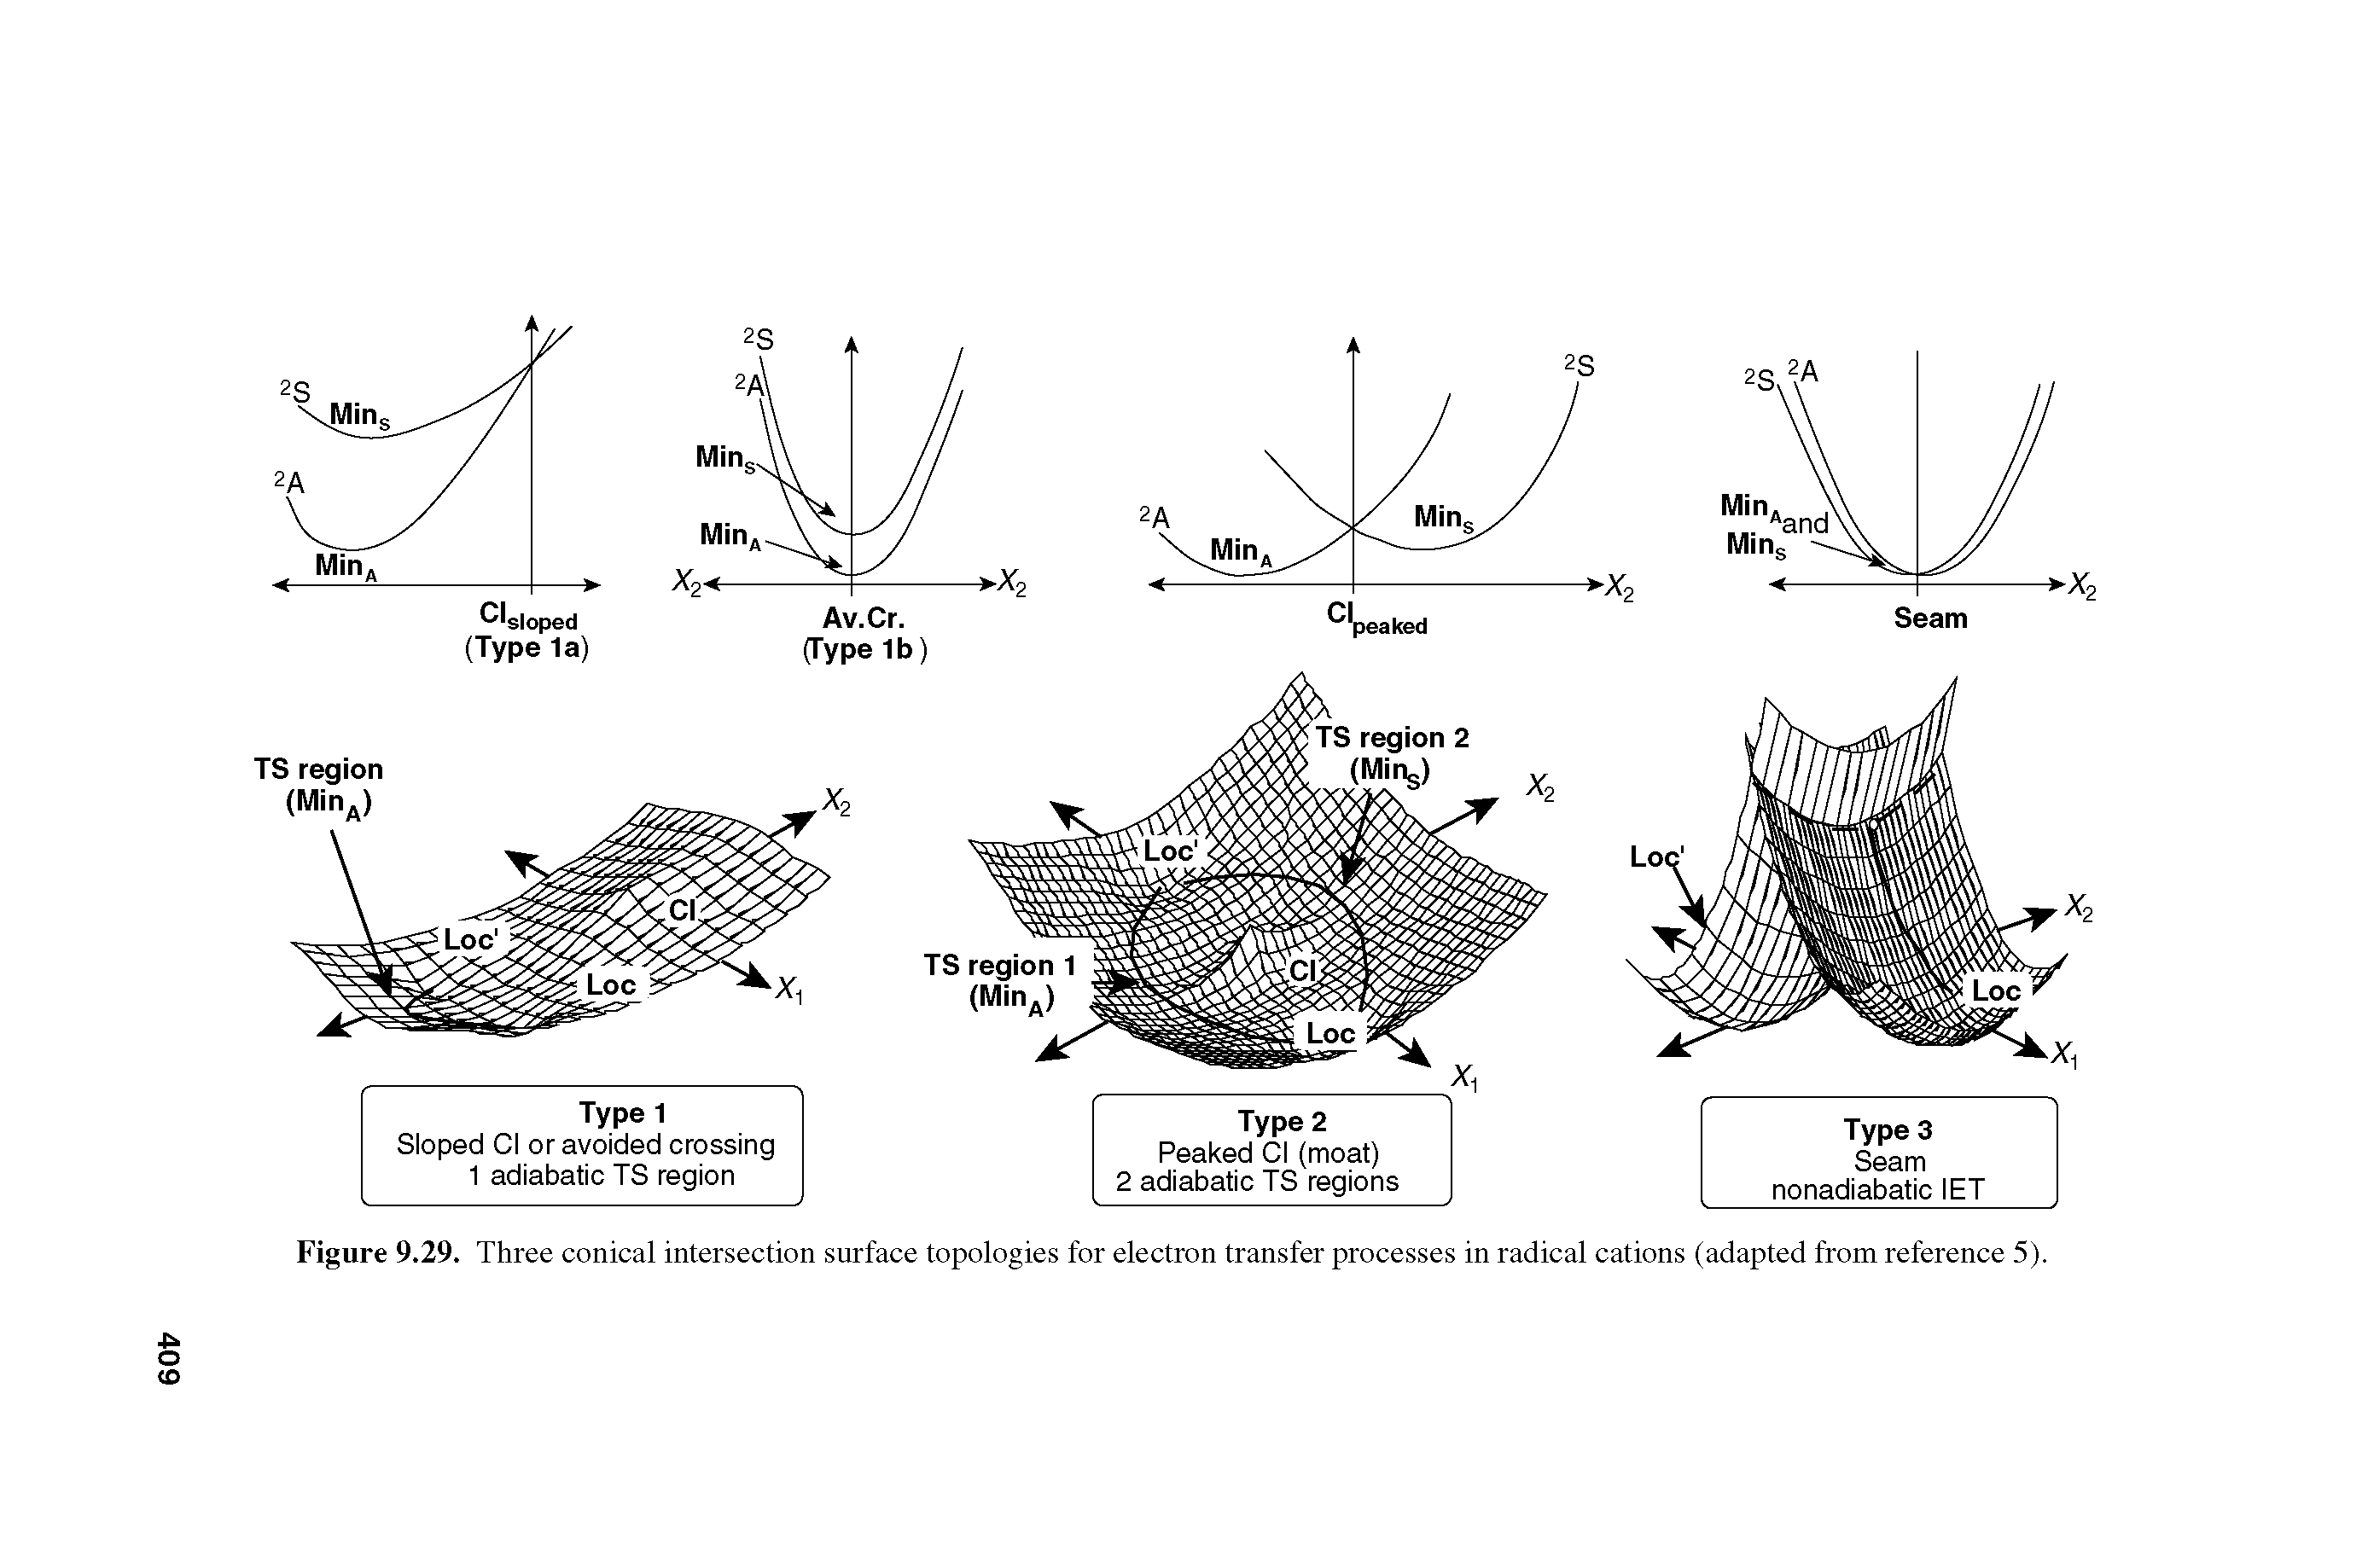 Figure 9.29. Three conical intersection surface topologies for electron transfer processes in radical cations (adapted from reference 5).